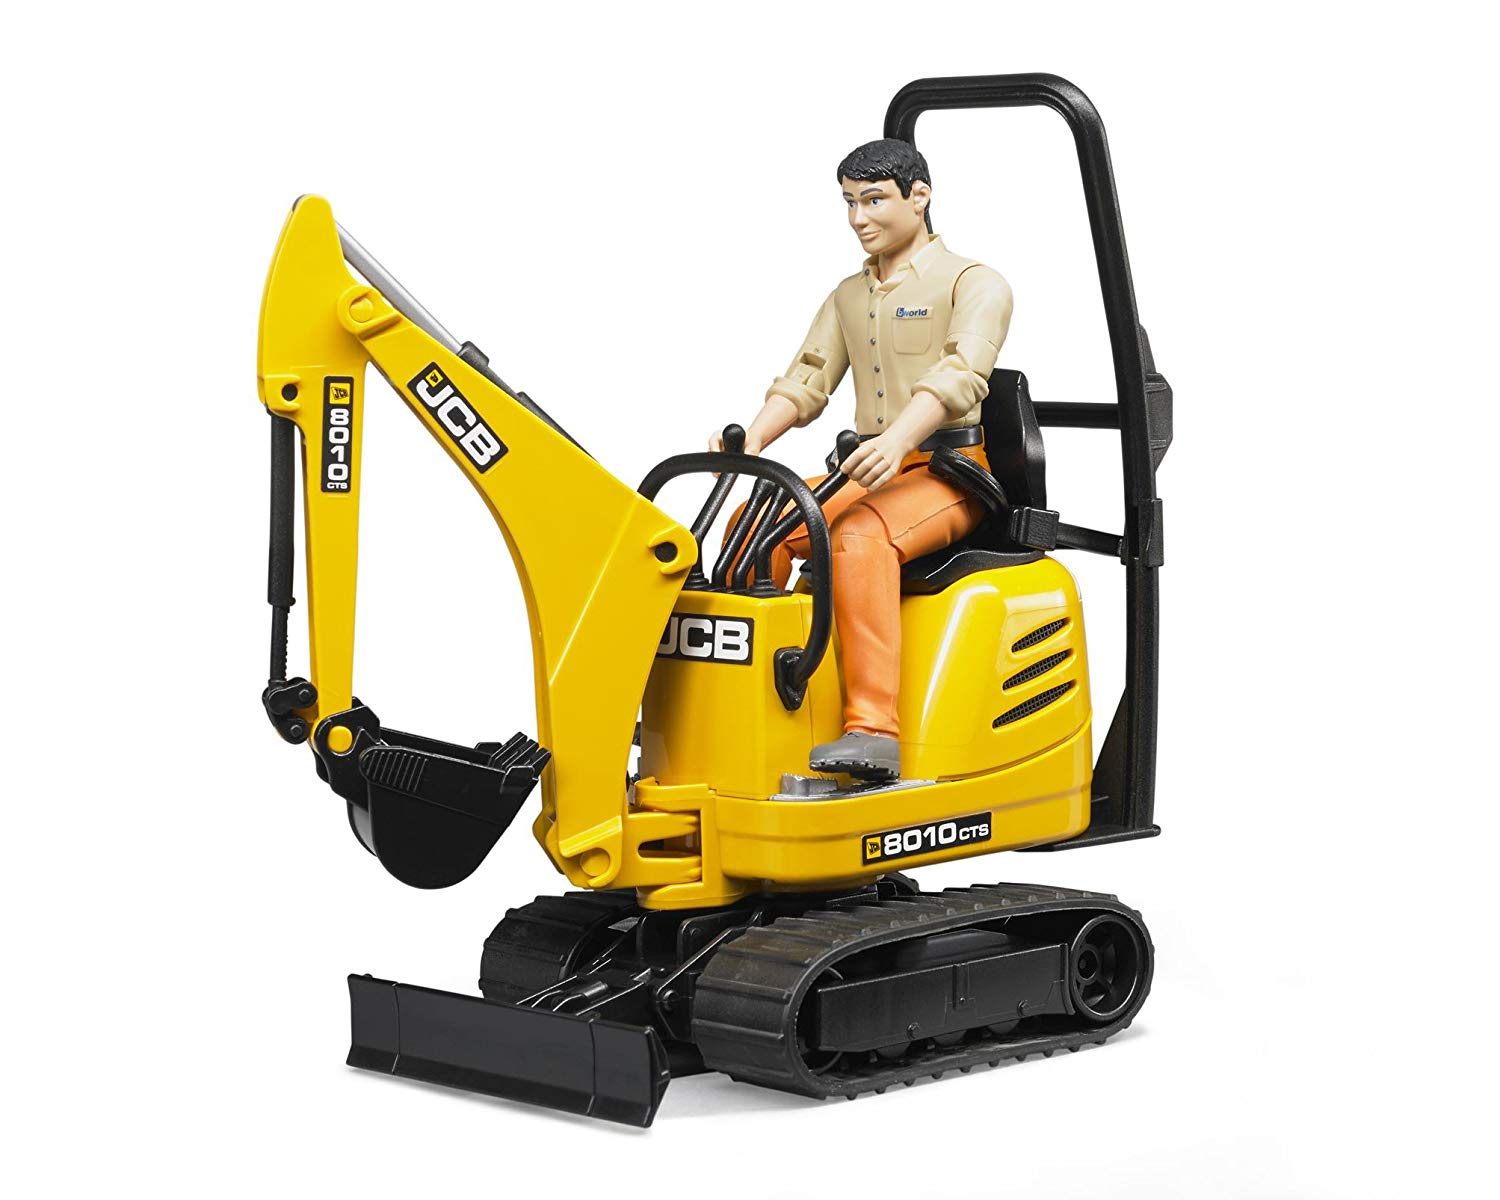 Bruder Jcb Micro Excavator Cts And Construction Workers Parent